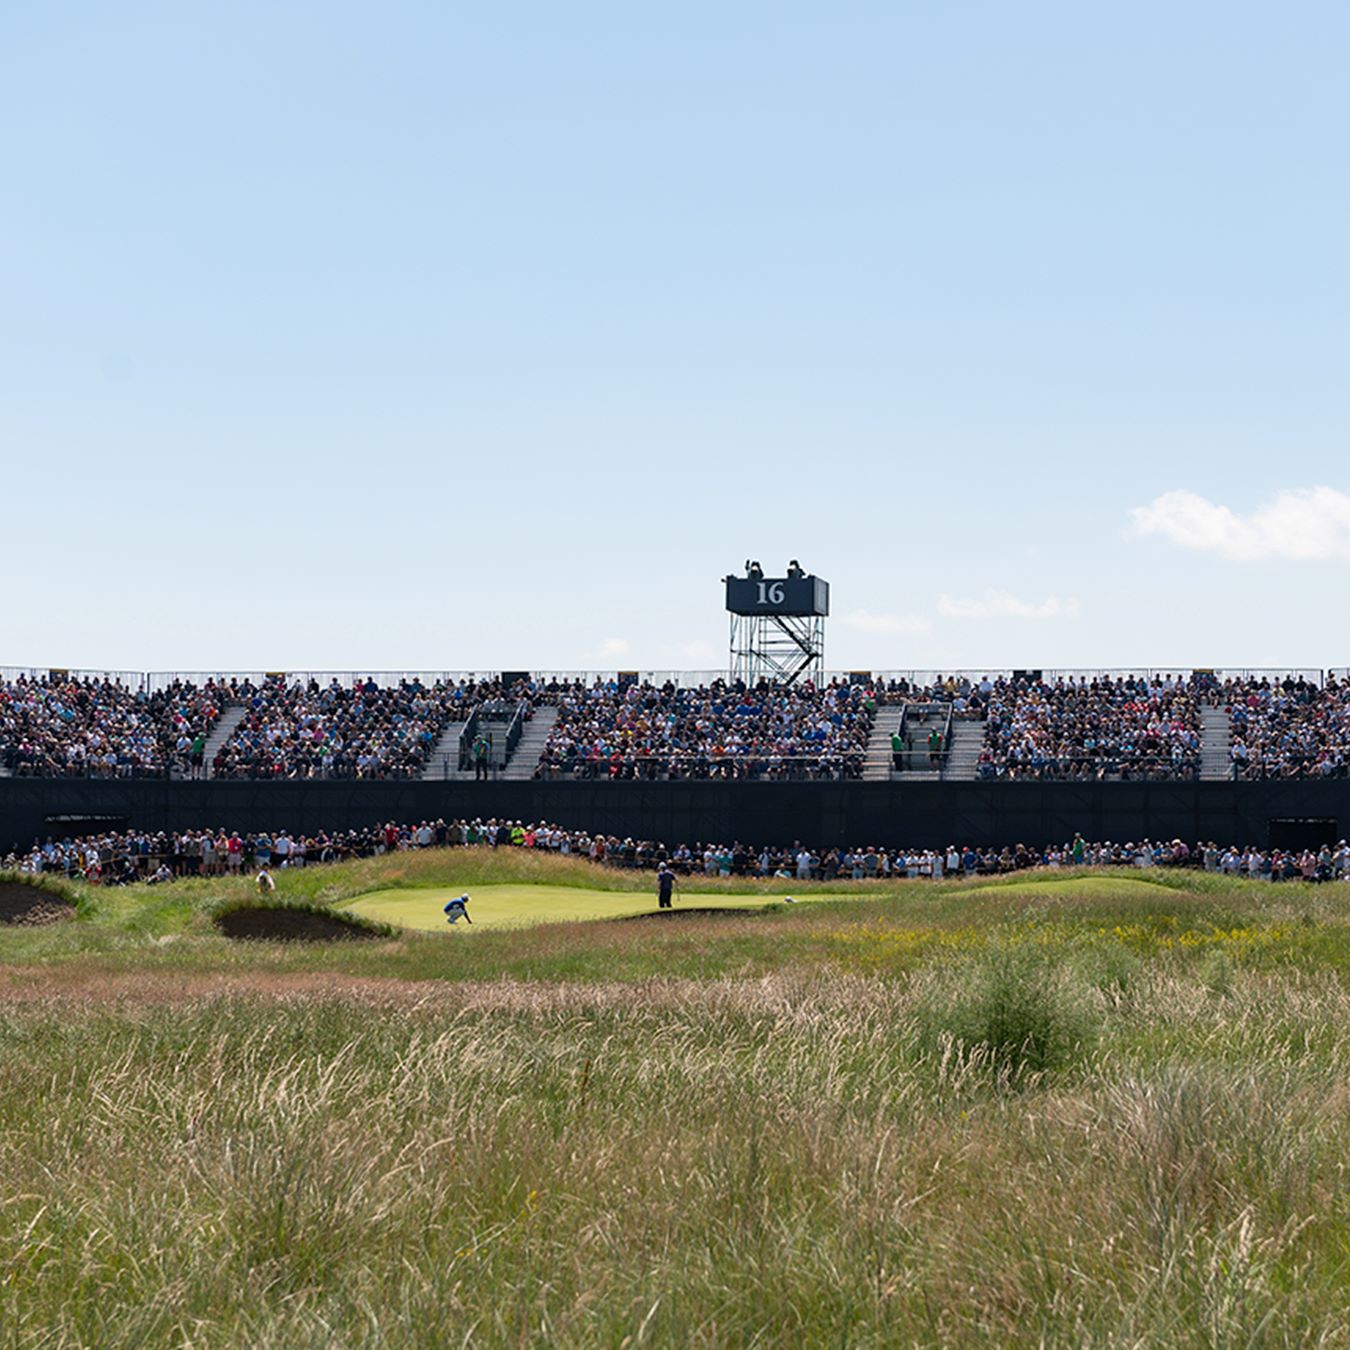 The stands packed with fans as golfers putt at The Open golf tournament